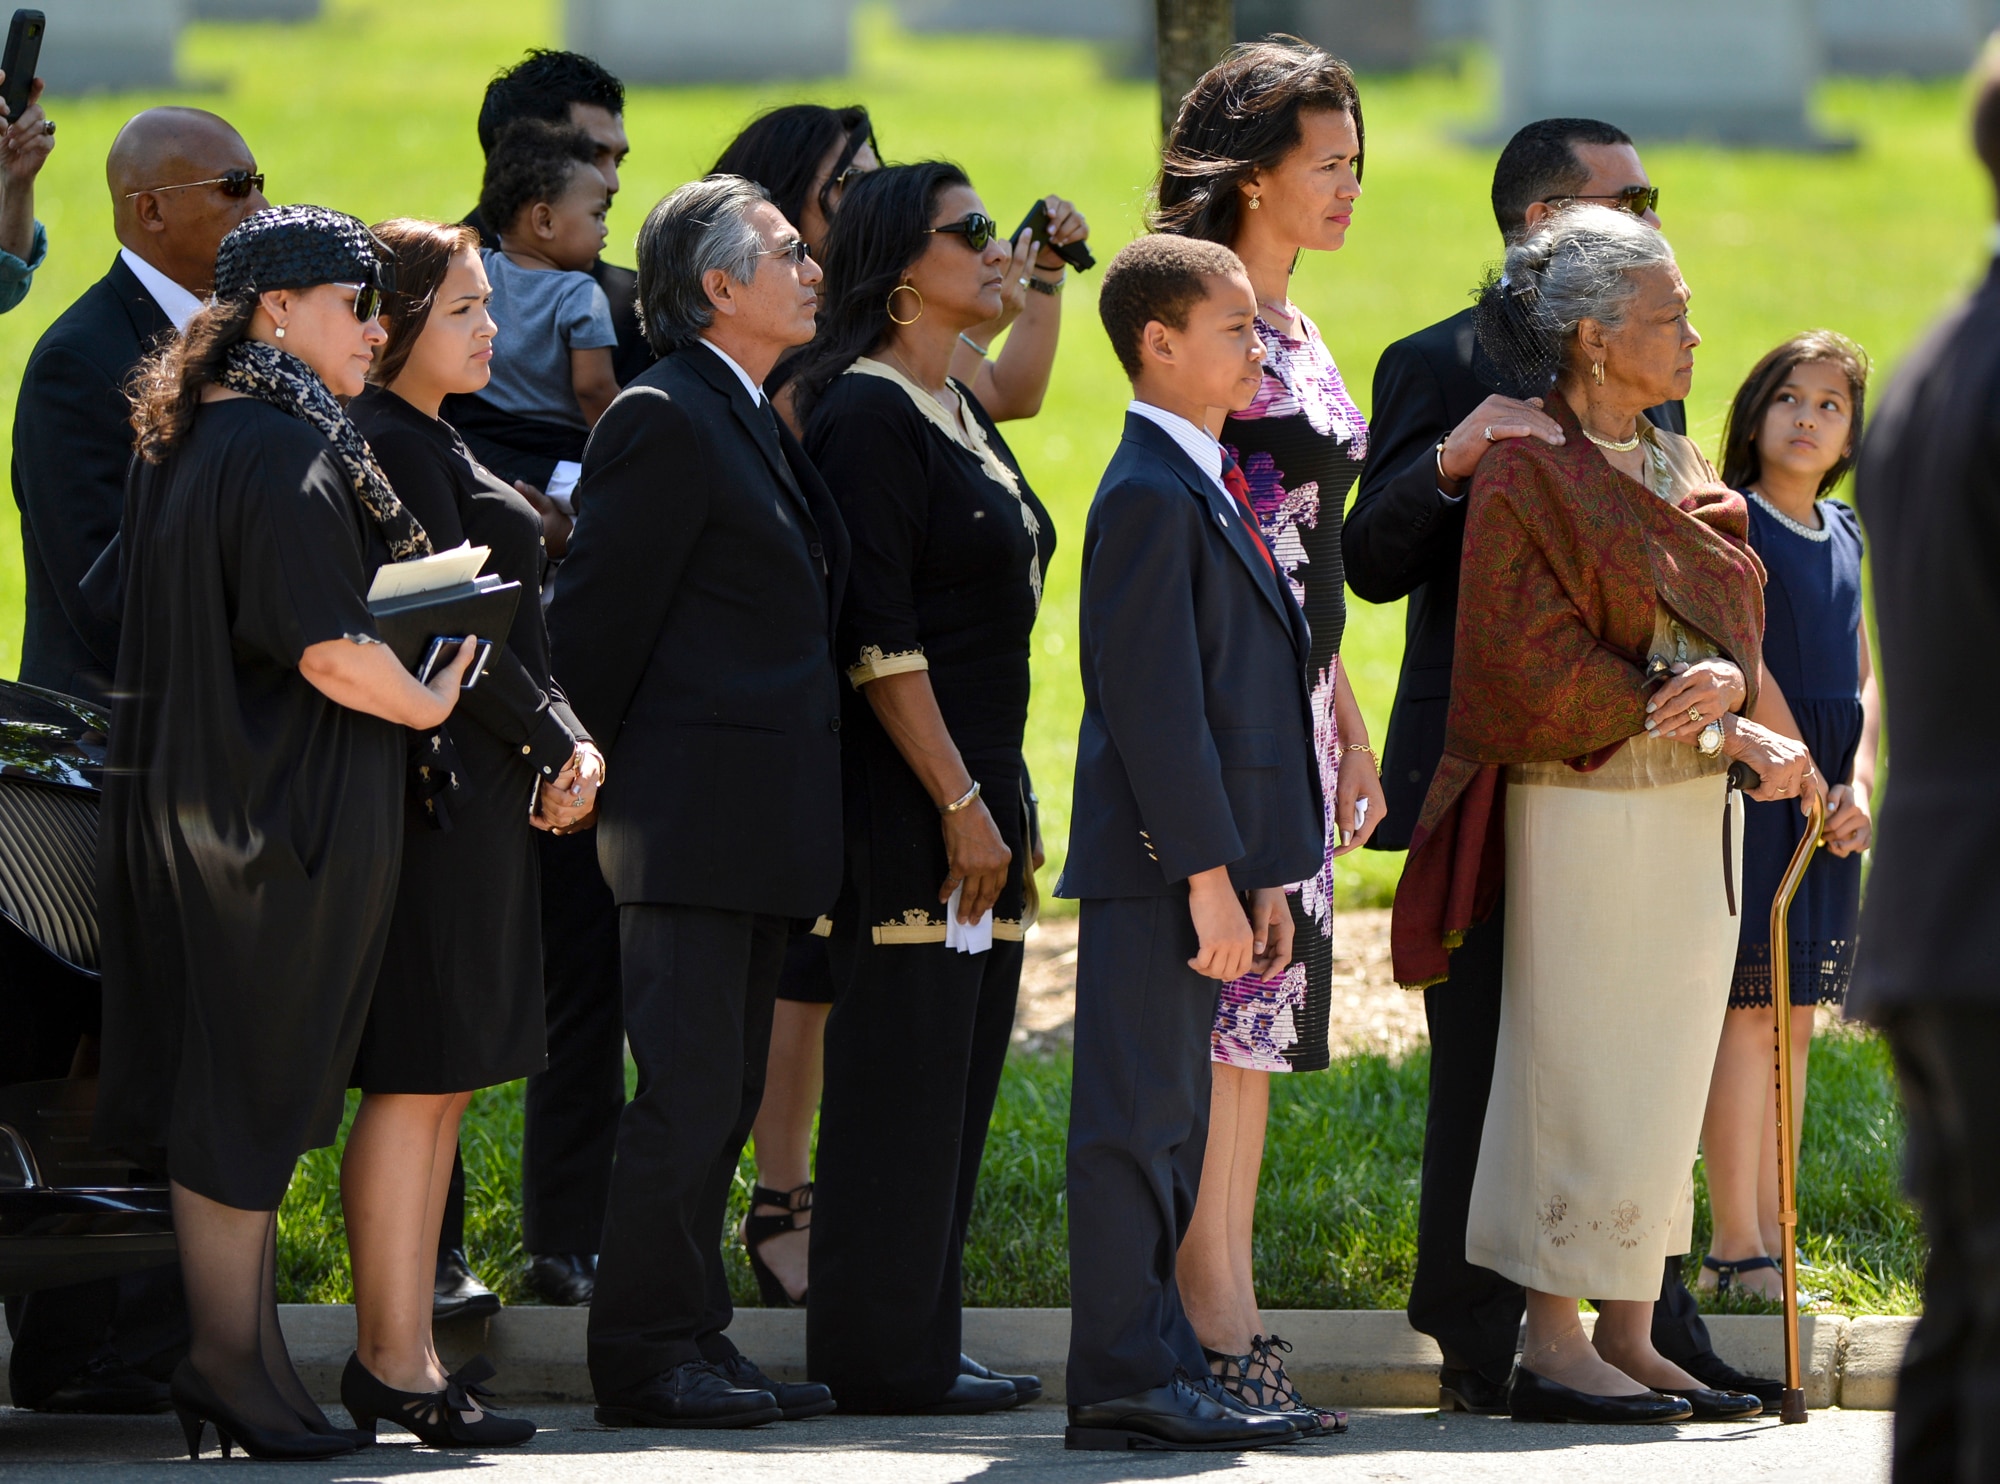 The family of former 2nd Lt. Malvin G. Whitfield watch as Whitfield's casket arrives at his burial site in Arlington National Cemetery in Arlington, Va., on June 8, 2016. While serving in the Korean War, Whitfield prepared to compete in track and field events at the 1951 Pan American Games by training on the runways between bombing missions.  (U.S. Air Force photo/Tech. Sgt. Joshua L. DeMotts)